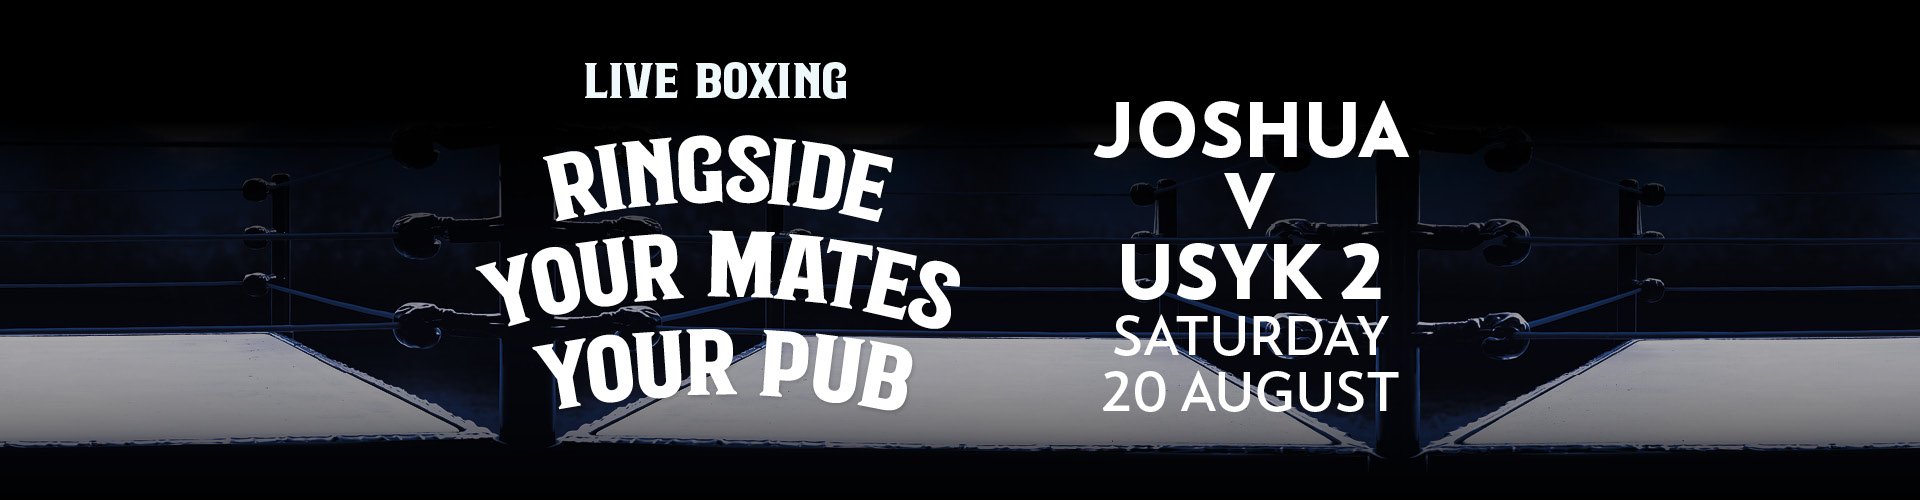 Live Boxing Ringside Your Mates Your Pub - Joshua V Usyk 2 Saturday 20 August